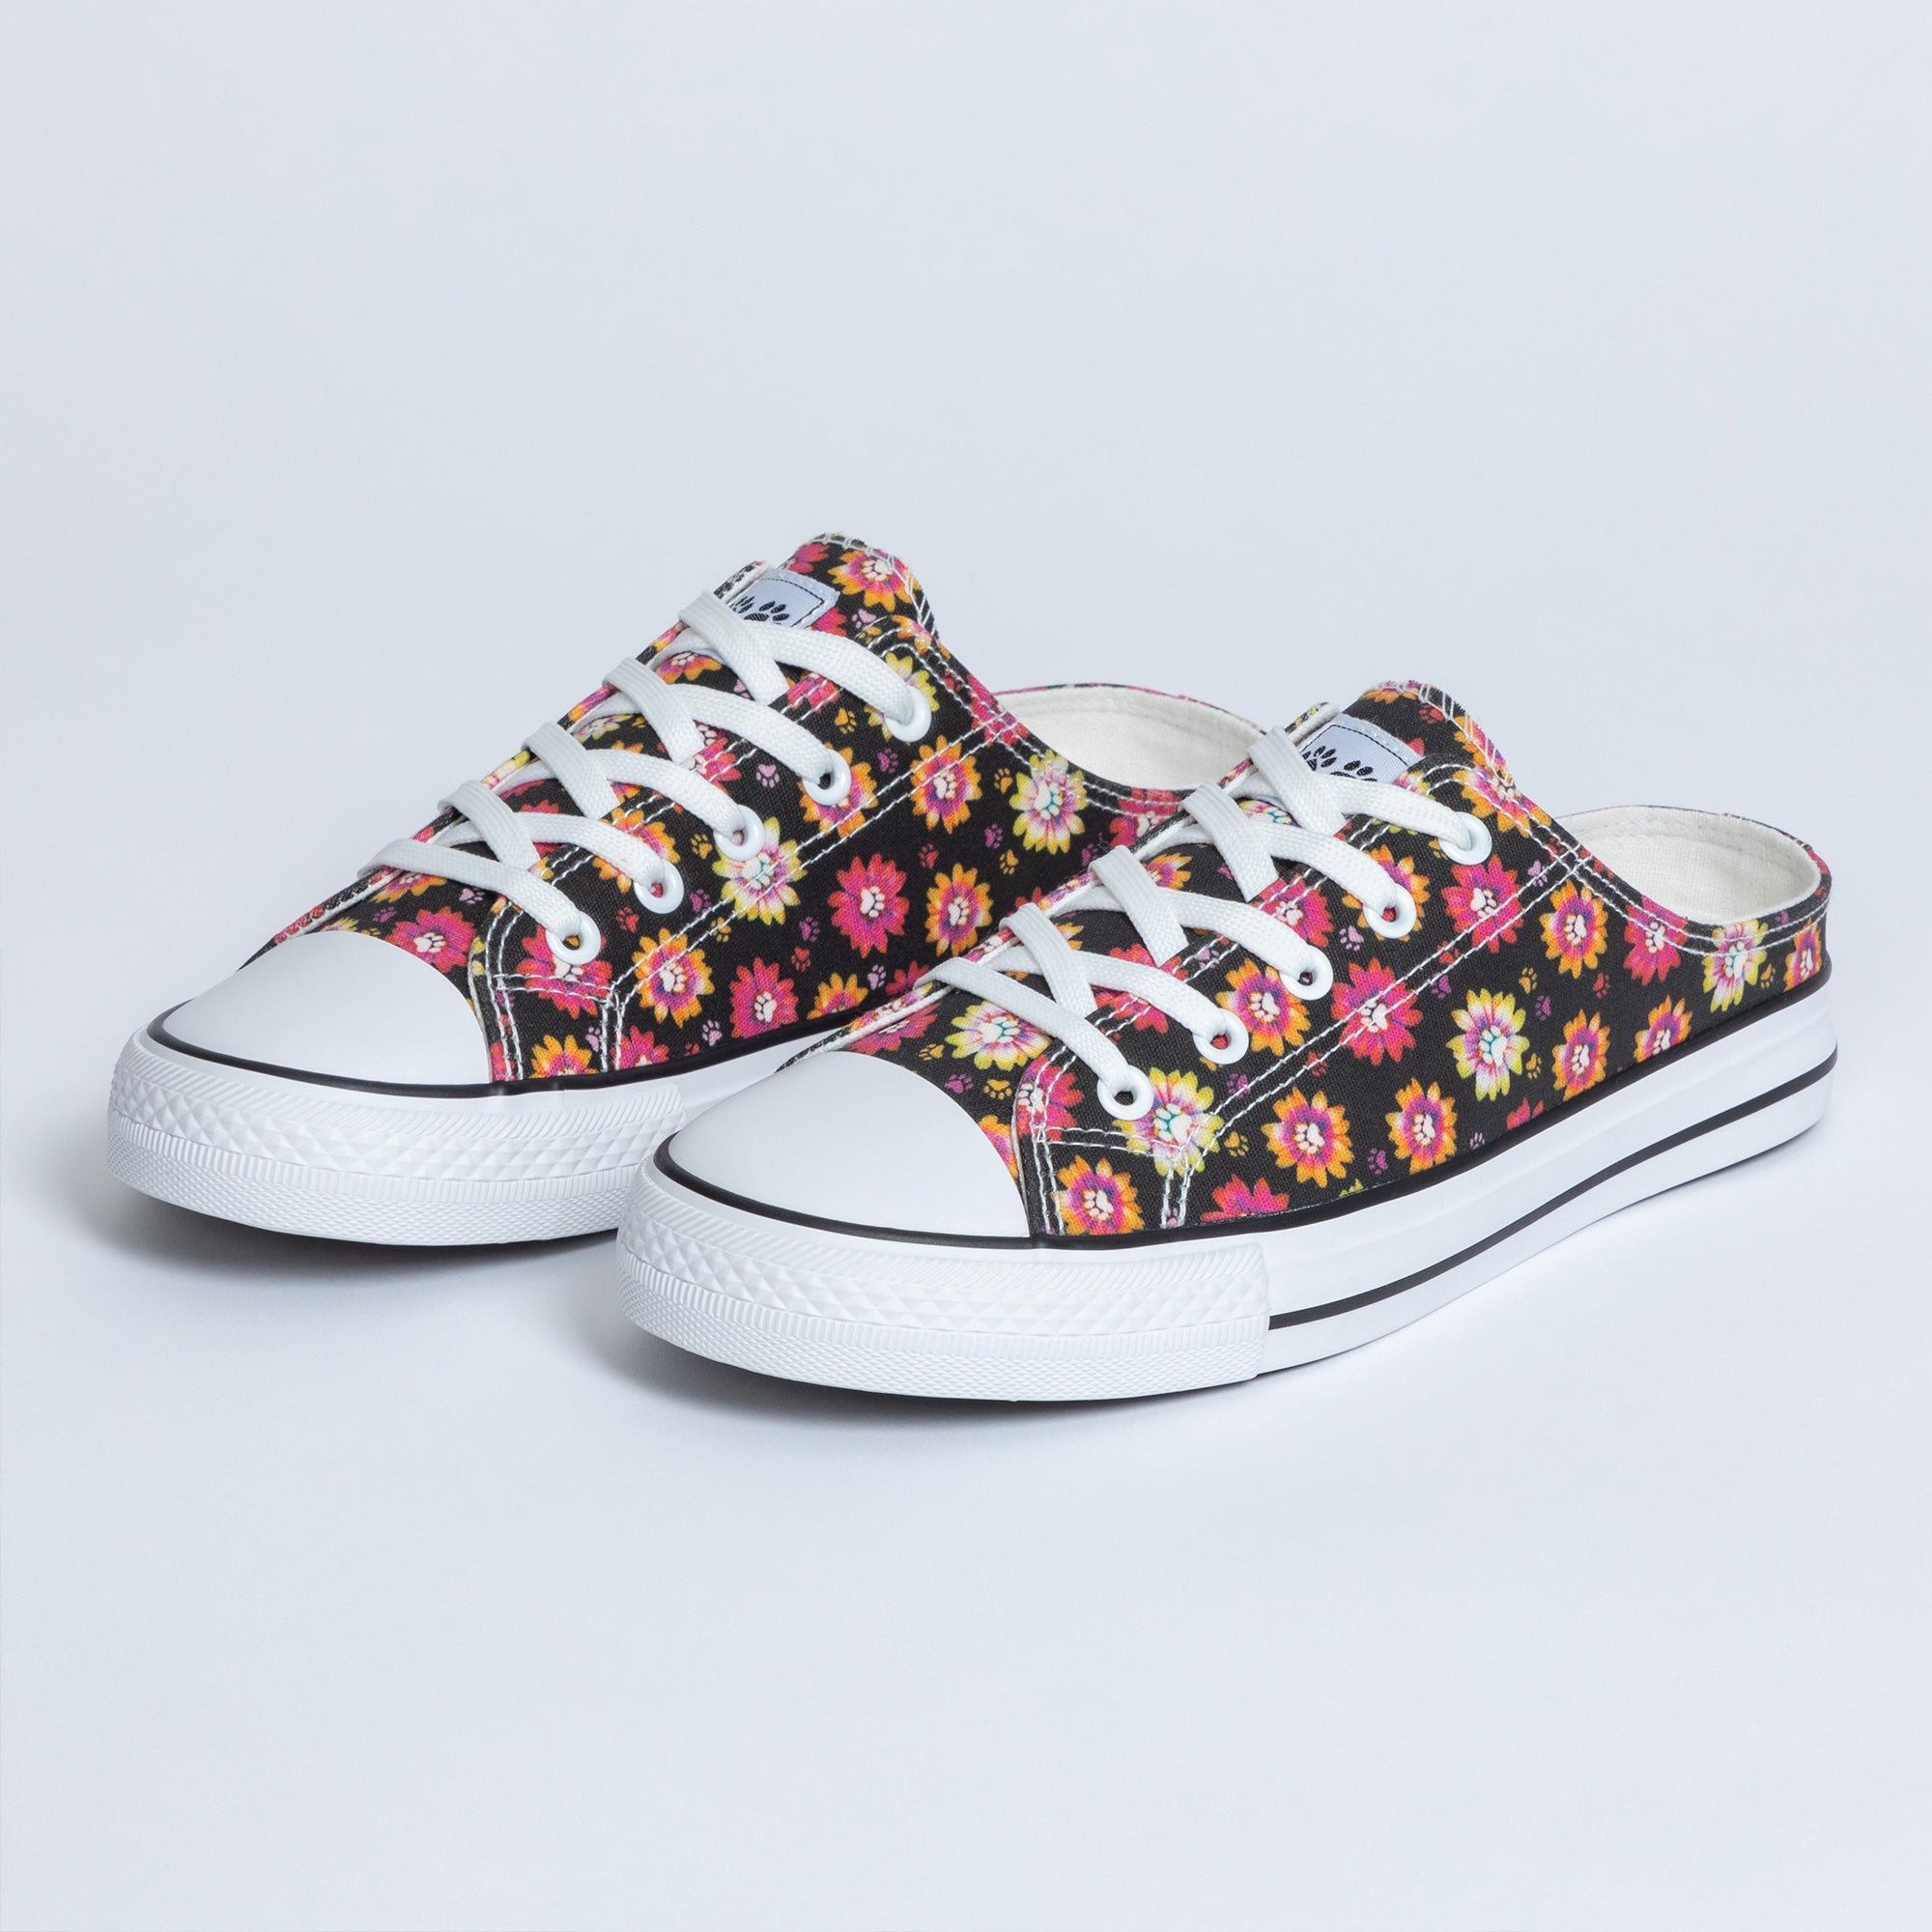 Paw Print Canvas Slip-On Sneakers - Pretty Paw Daisies - 9